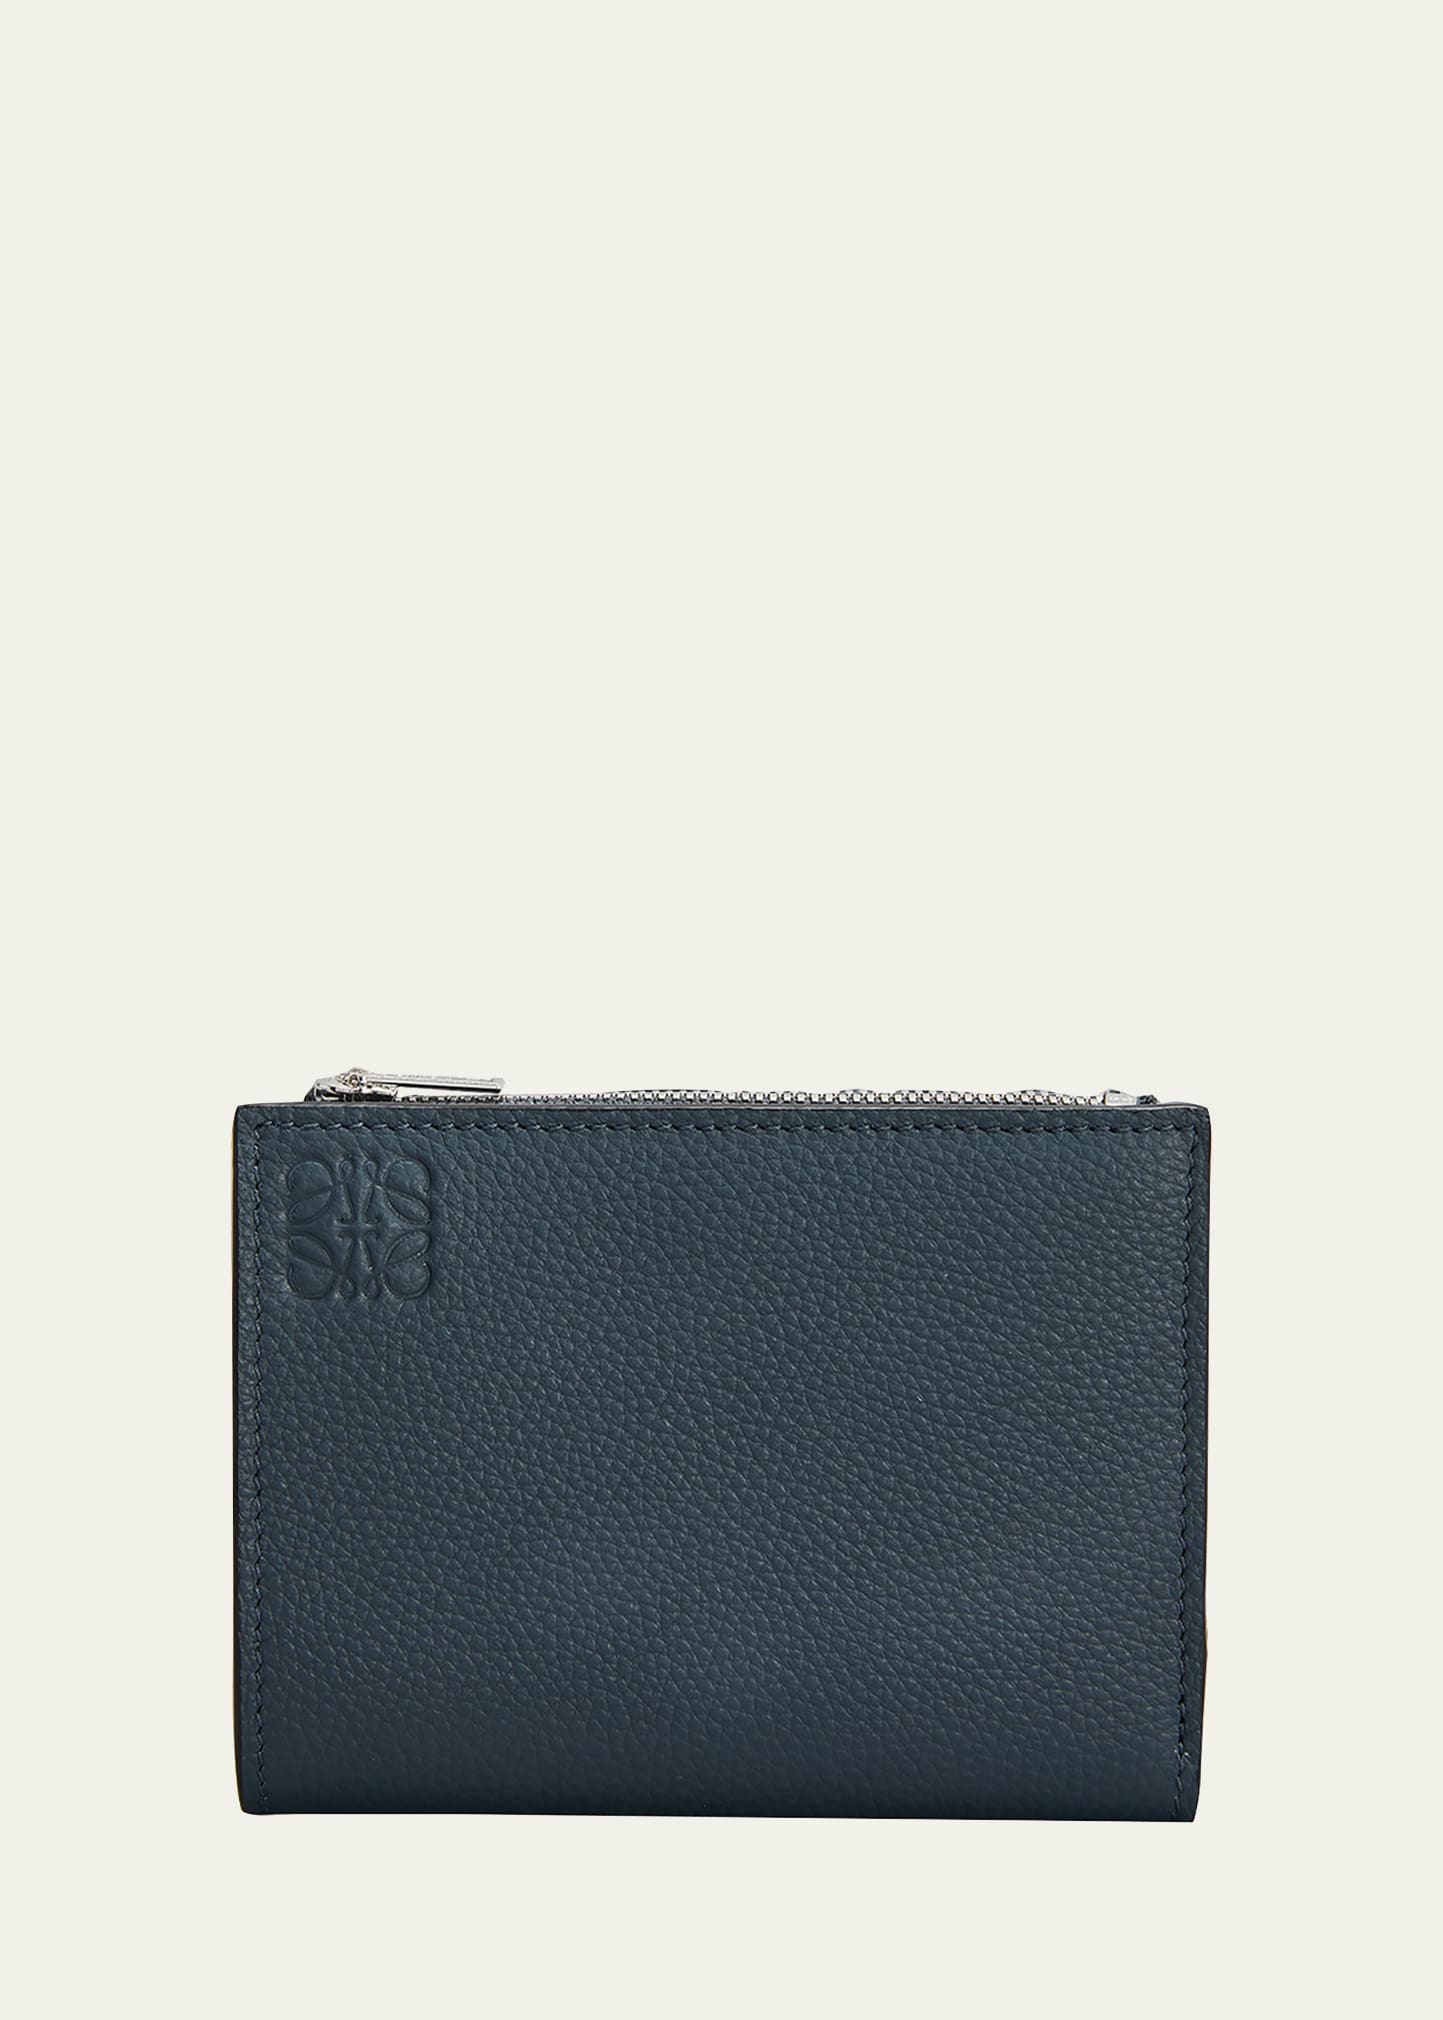 Men's Leather Bifold Wallet with Zip Coin Pocket